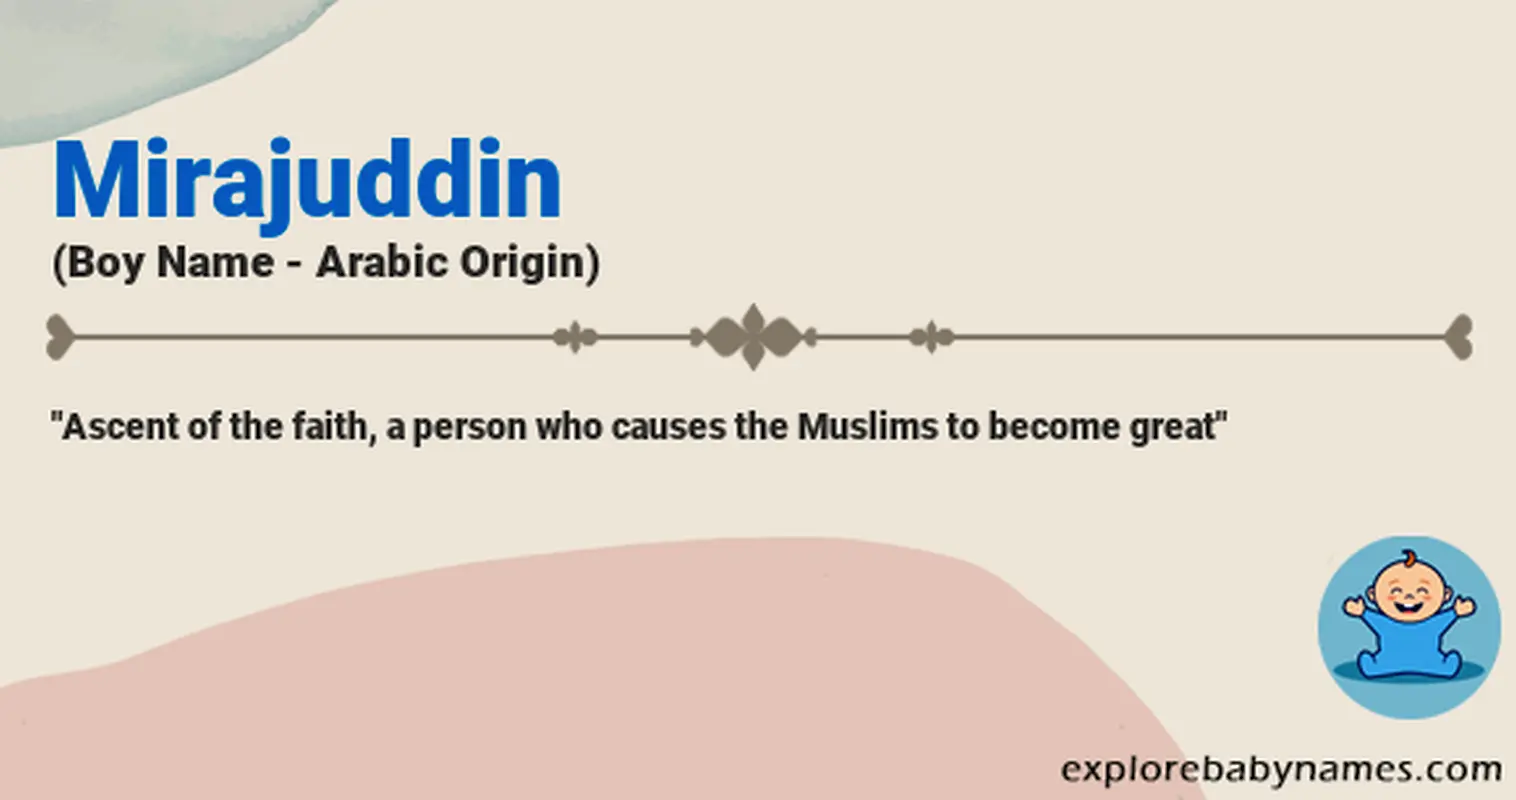 Meaning of Mirajuddin